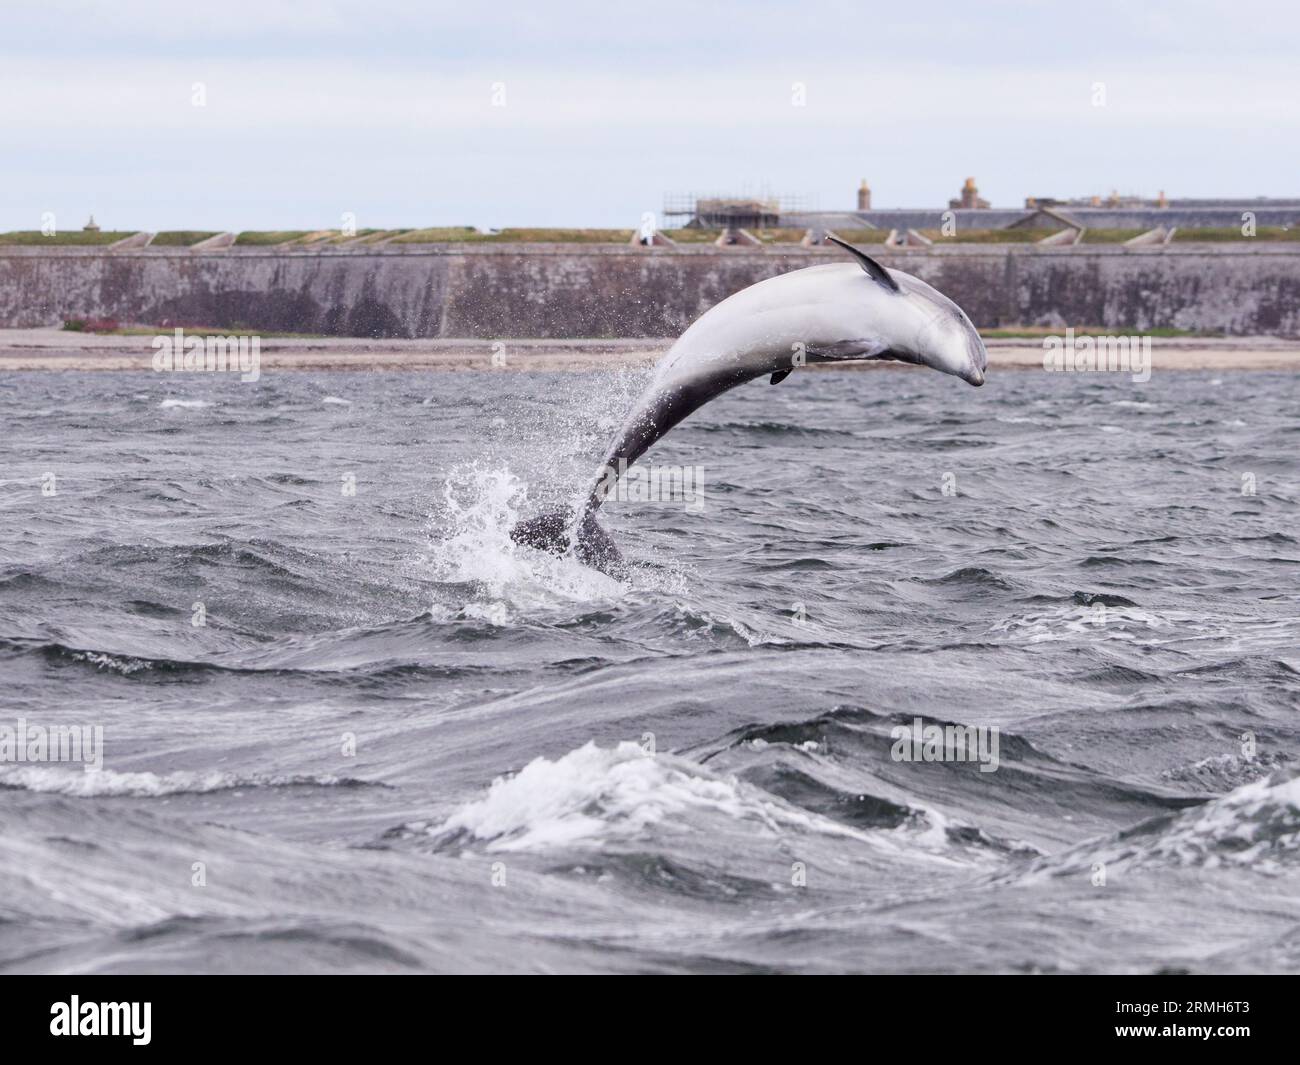 Bottlenose dolphin (Tursiops truncatus) breaching, jumping, leaping in the Moray Firth, Scotland, UK Stock Photo